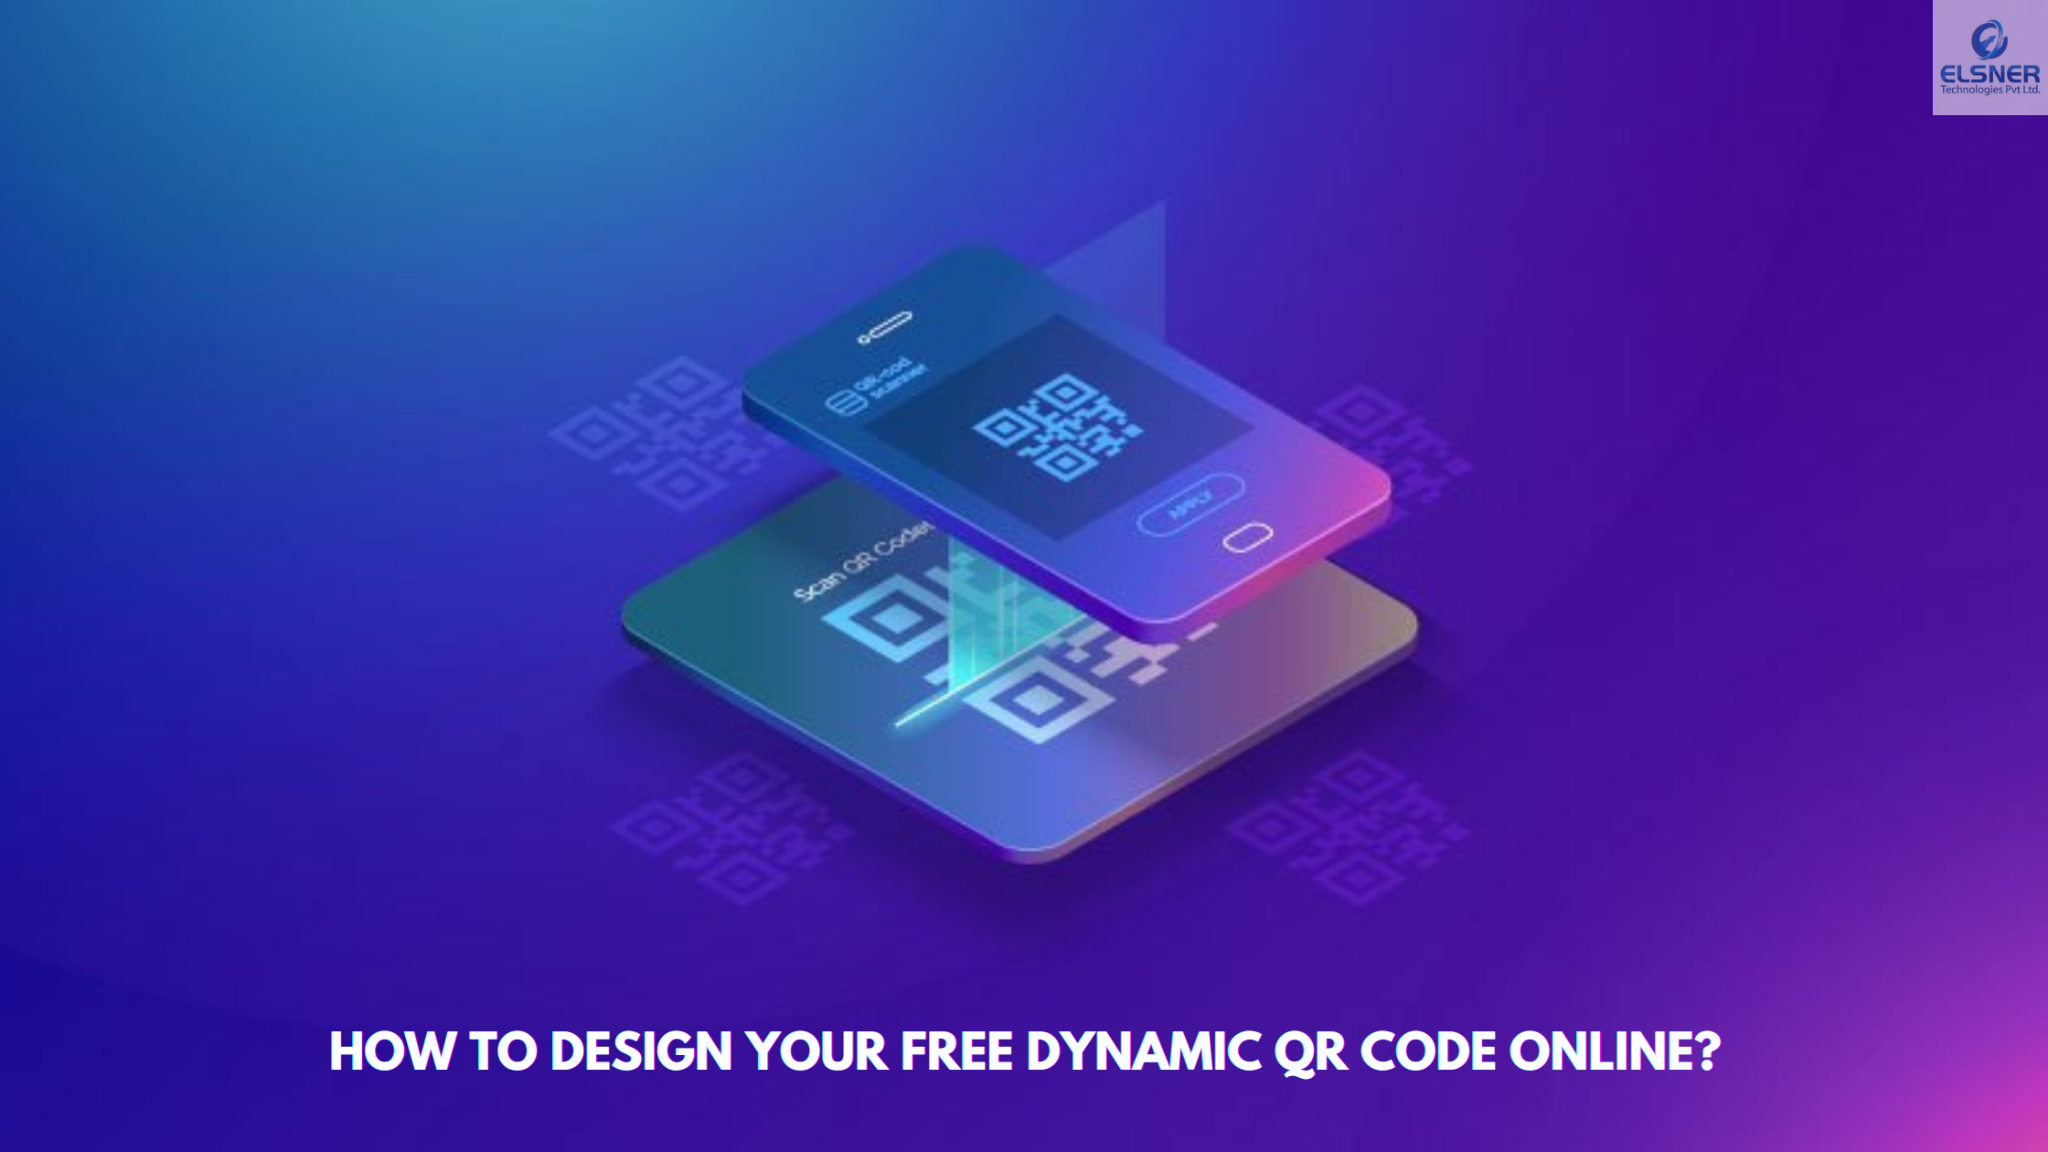 How to design your free dynamic qr code online?